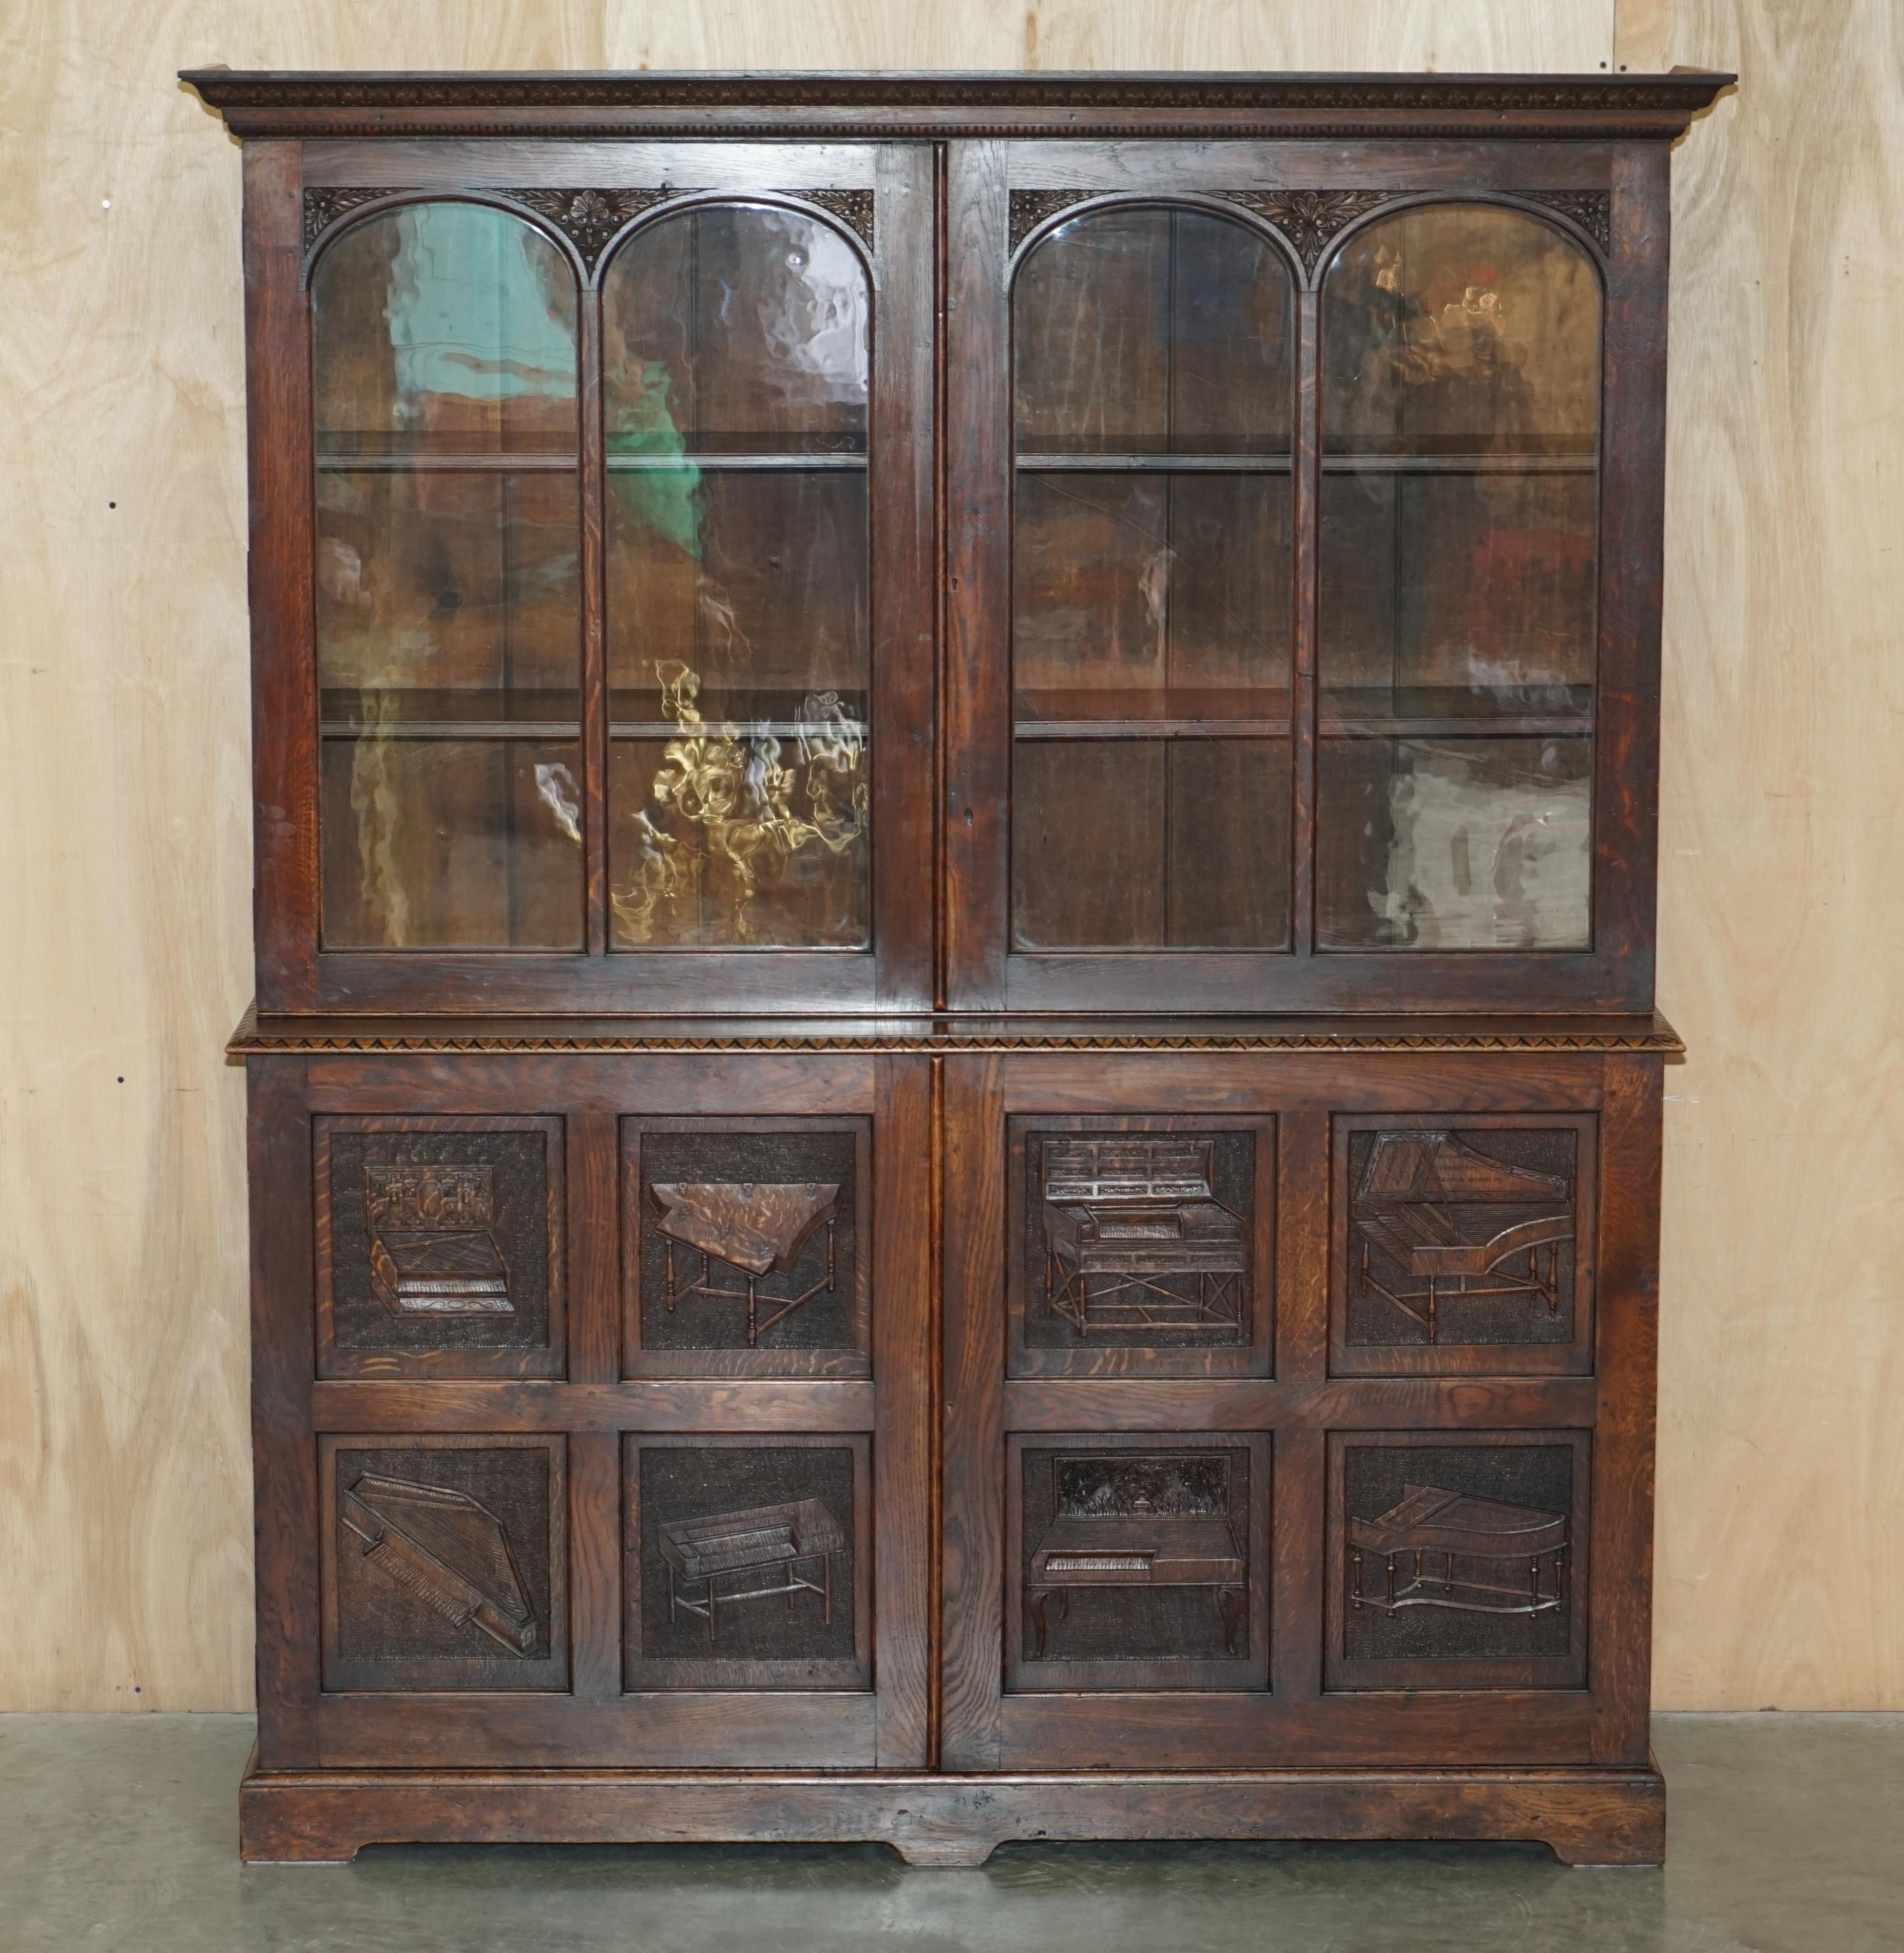 Royal House Antiques

Royal House Antiques is delighted to offer for sale this absolutely exquisite hand carved with Musical instruments, library bookcase cabinet, made for Charles Taphouse of Oxford Music & Instrument Shop, then owned by the Oxford